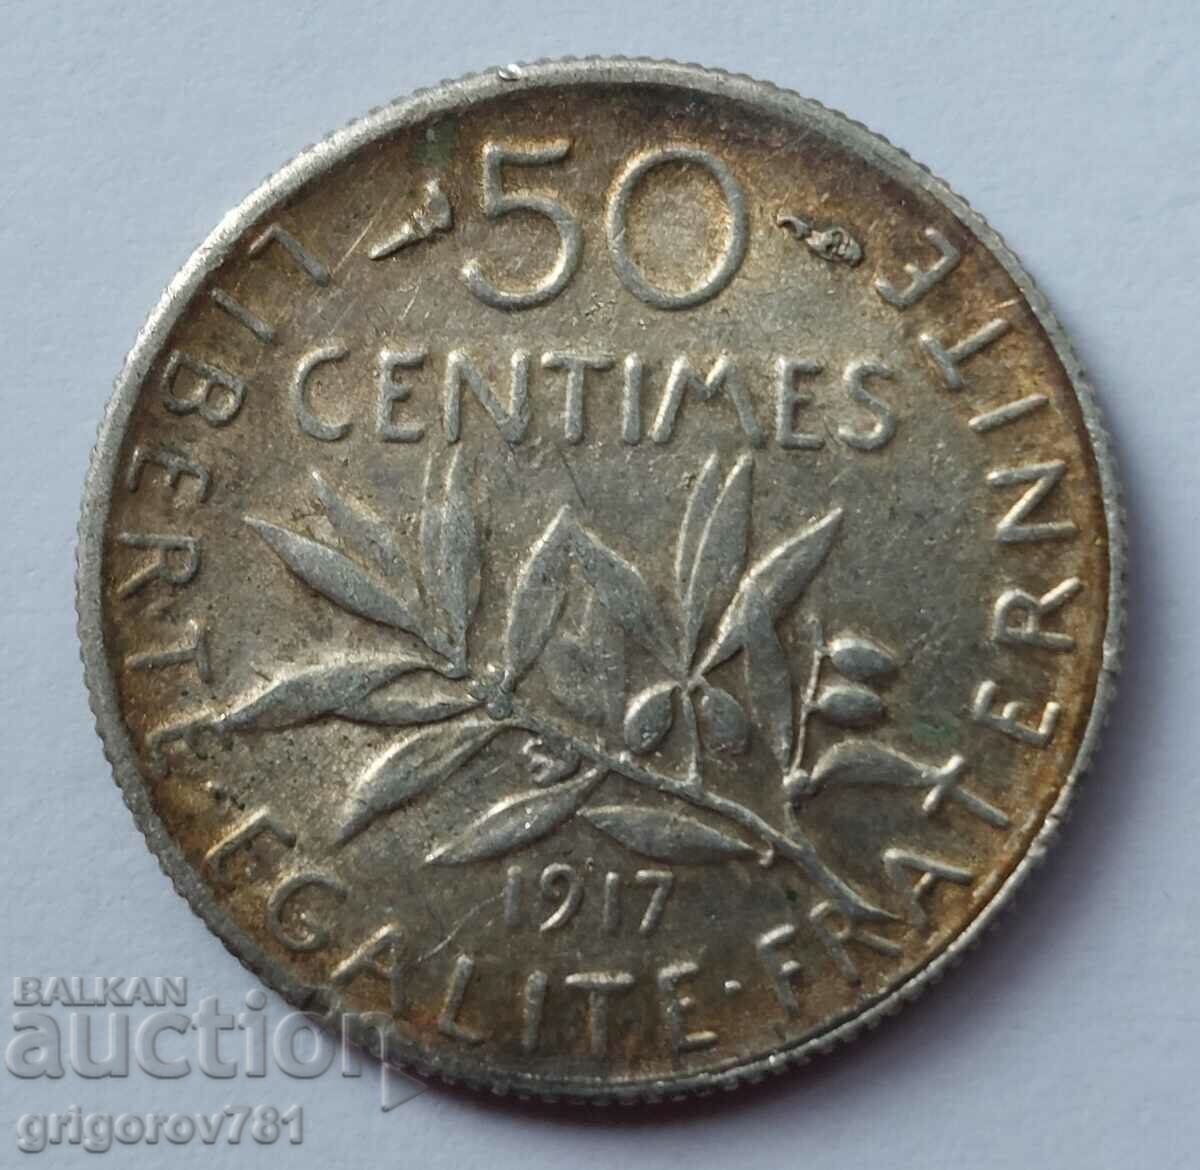 50 centimes silver France 1917 - silver coin №42